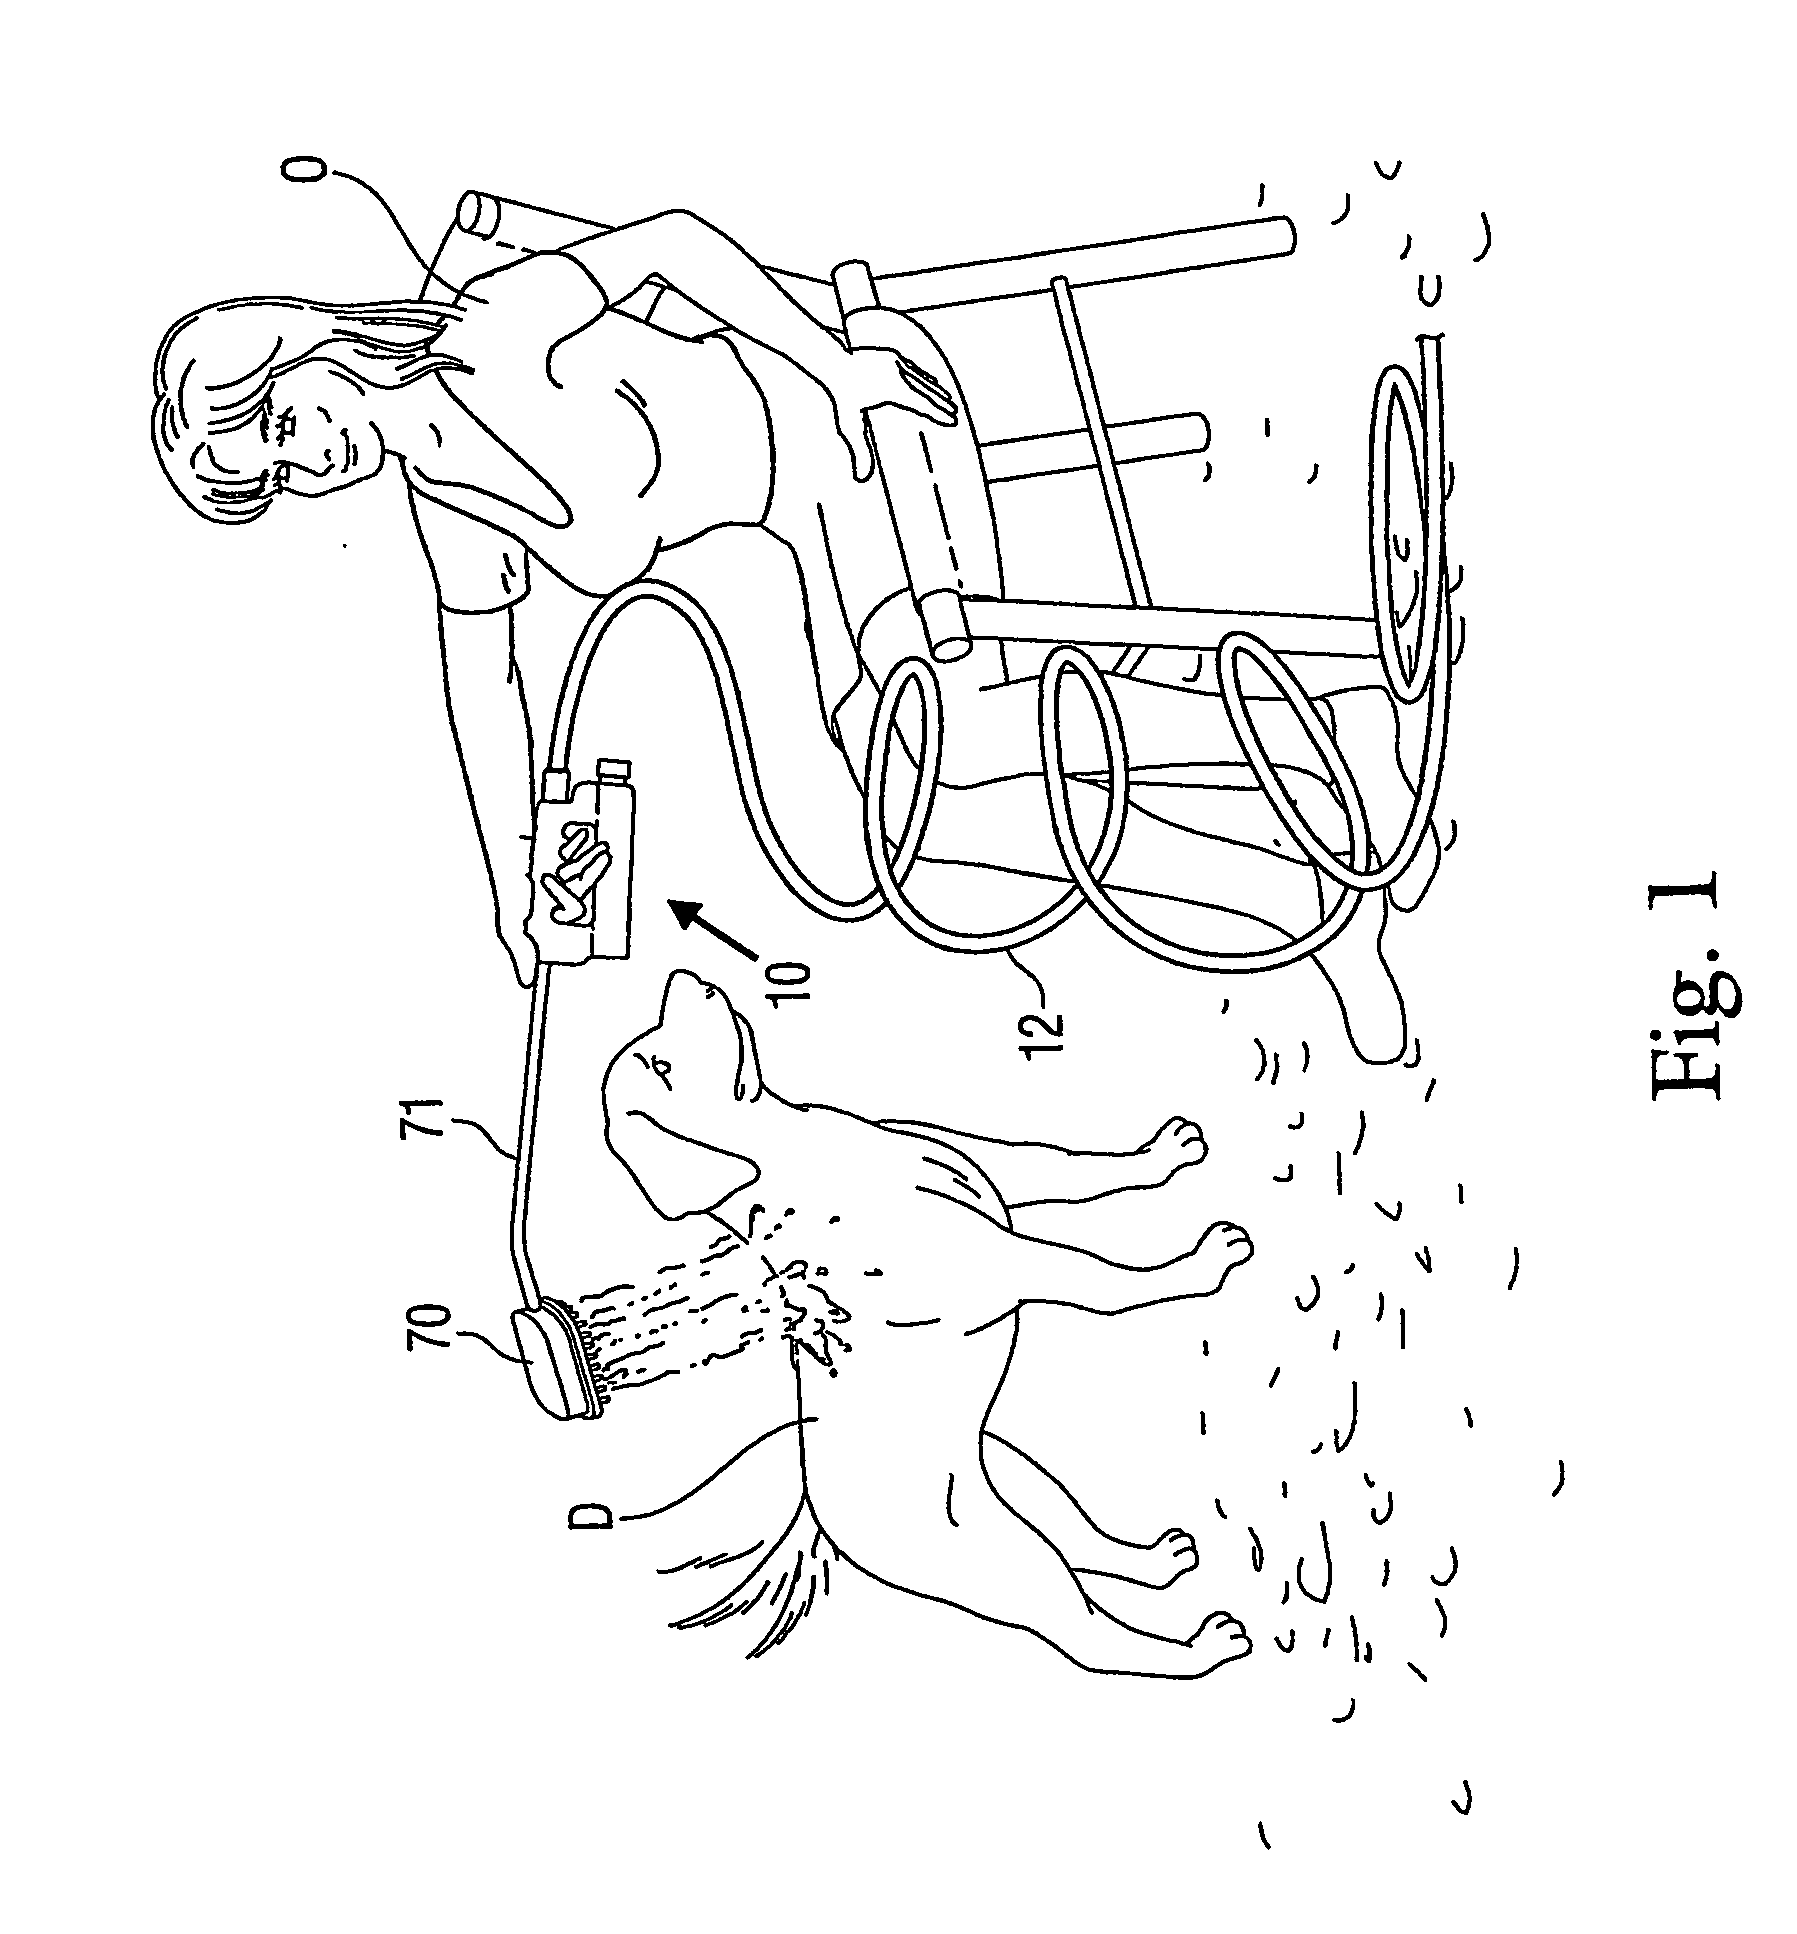 Shampooing device